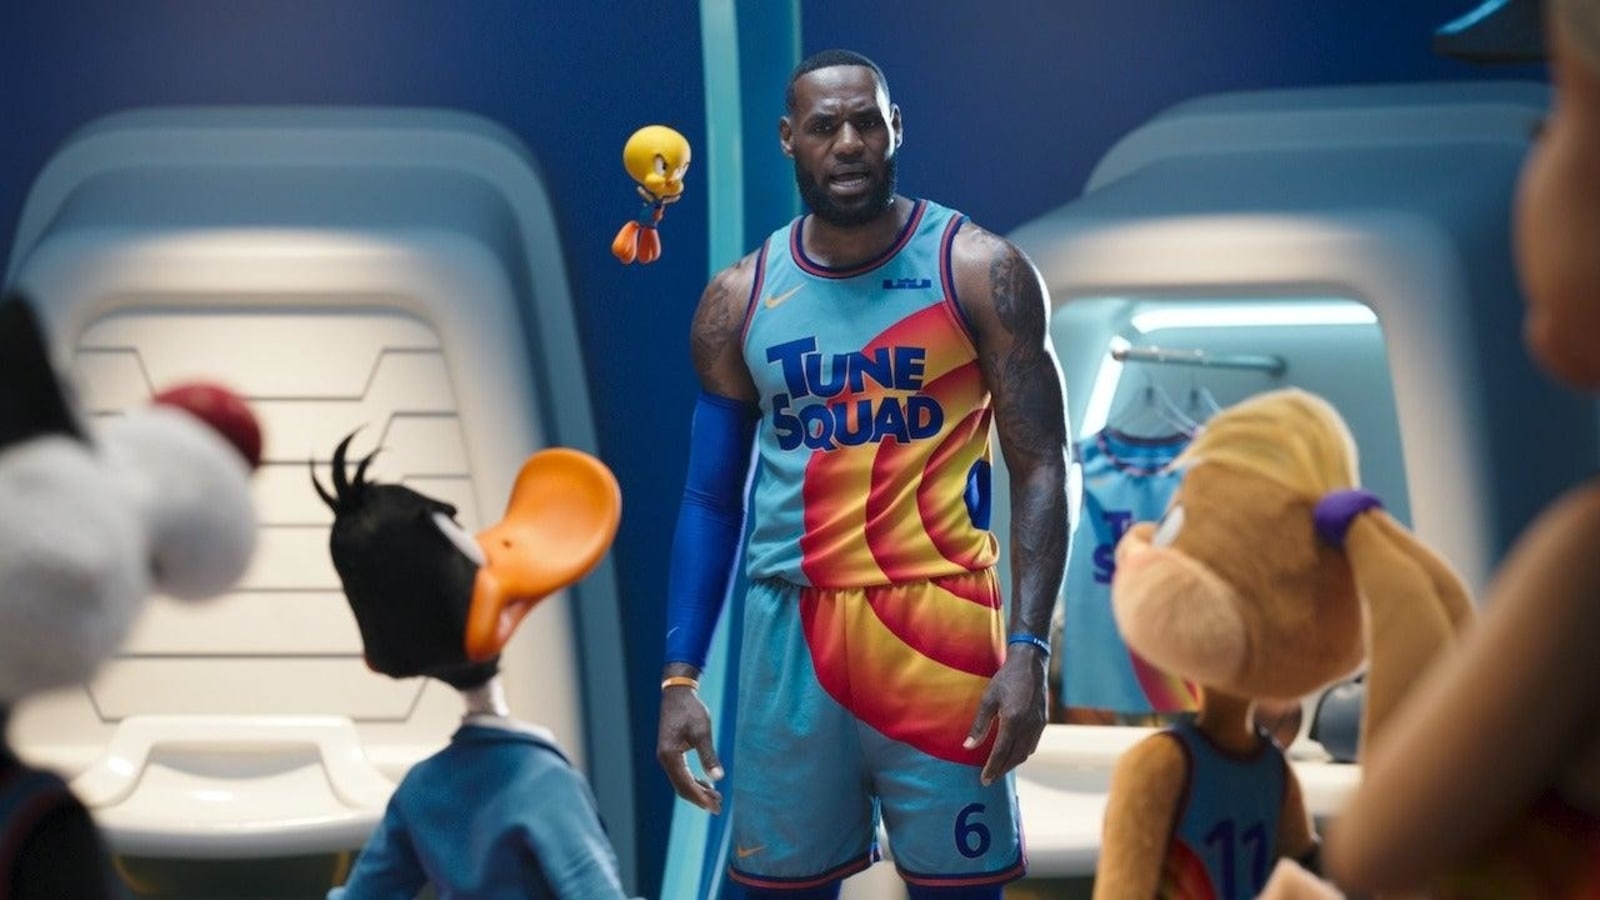 Review: SpaceJam: A New Legacy (Malcolm D. Lee, 2021) — Fantasy/Animation